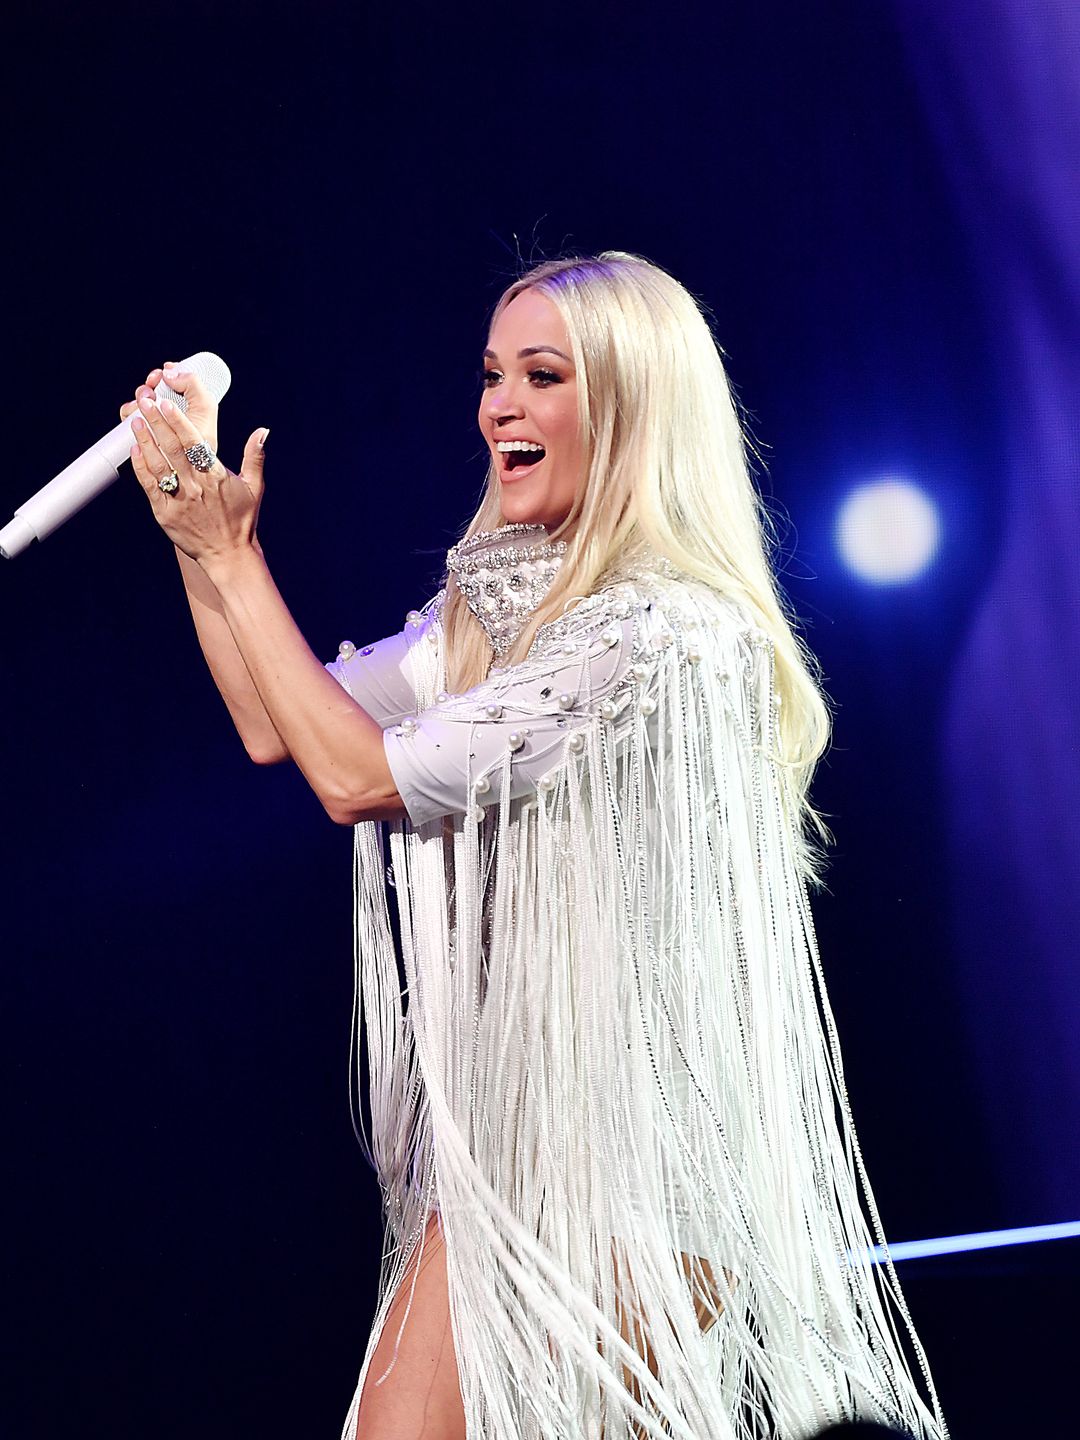 Carrie Underwood in fringe outfit